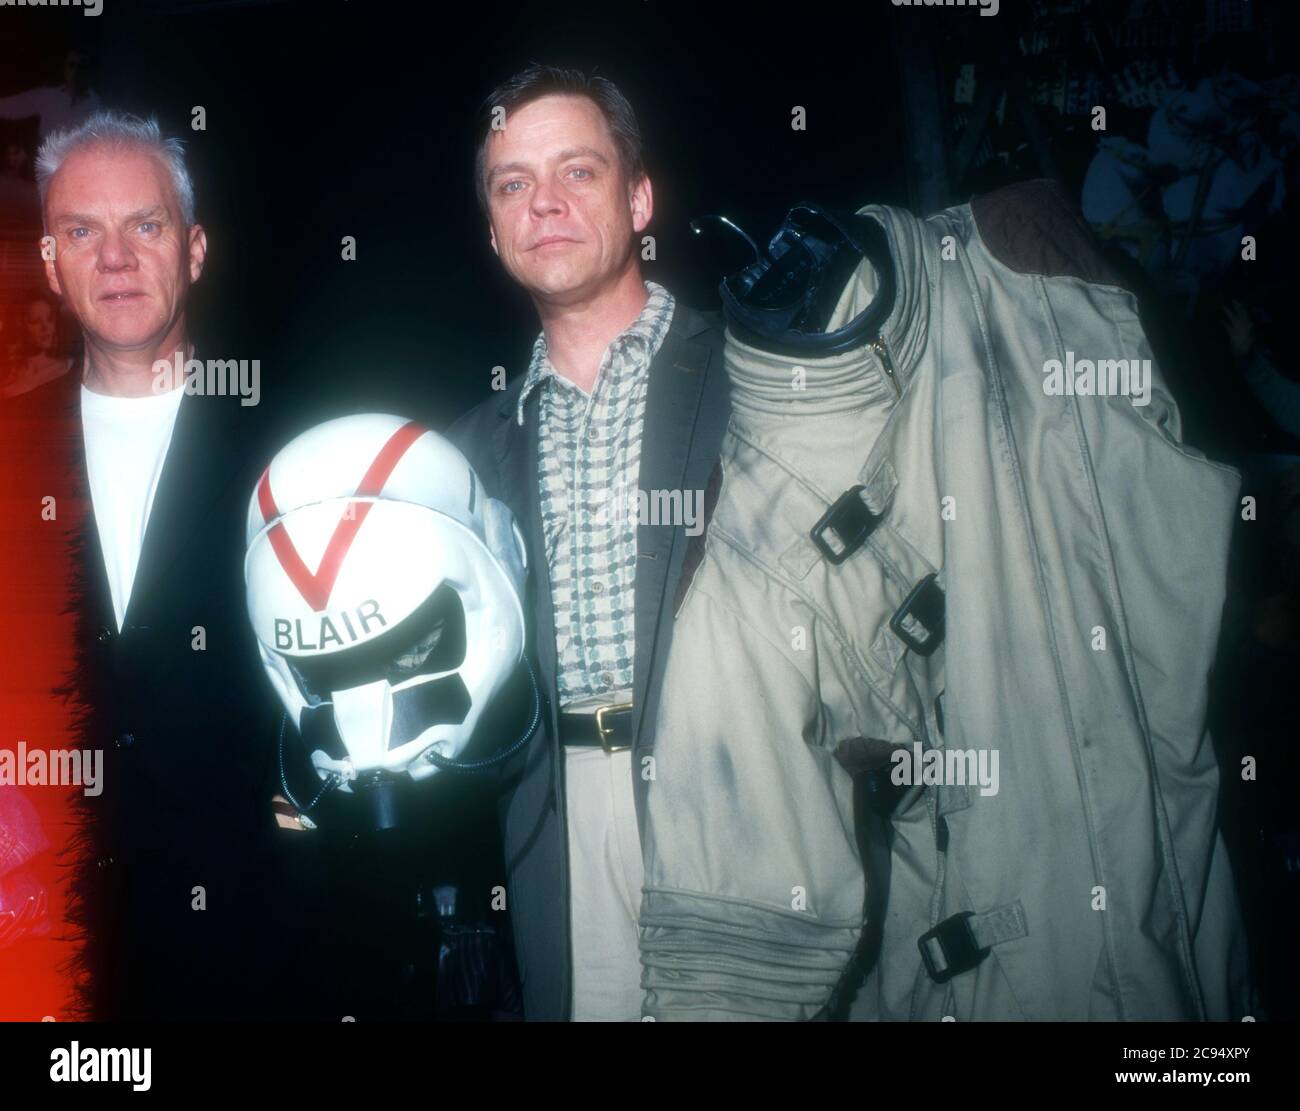 Los Angeles, California, USA 8th February 1996 Actor Malcolm McDowell and actor Mark Hamill attend Wings Commander 4 Costume Presentation on February 8, 1996 at Planet Hollywood in Los Angeles, California, USA. Photo by Barry King/Alamy Stock Photo Stock Photo